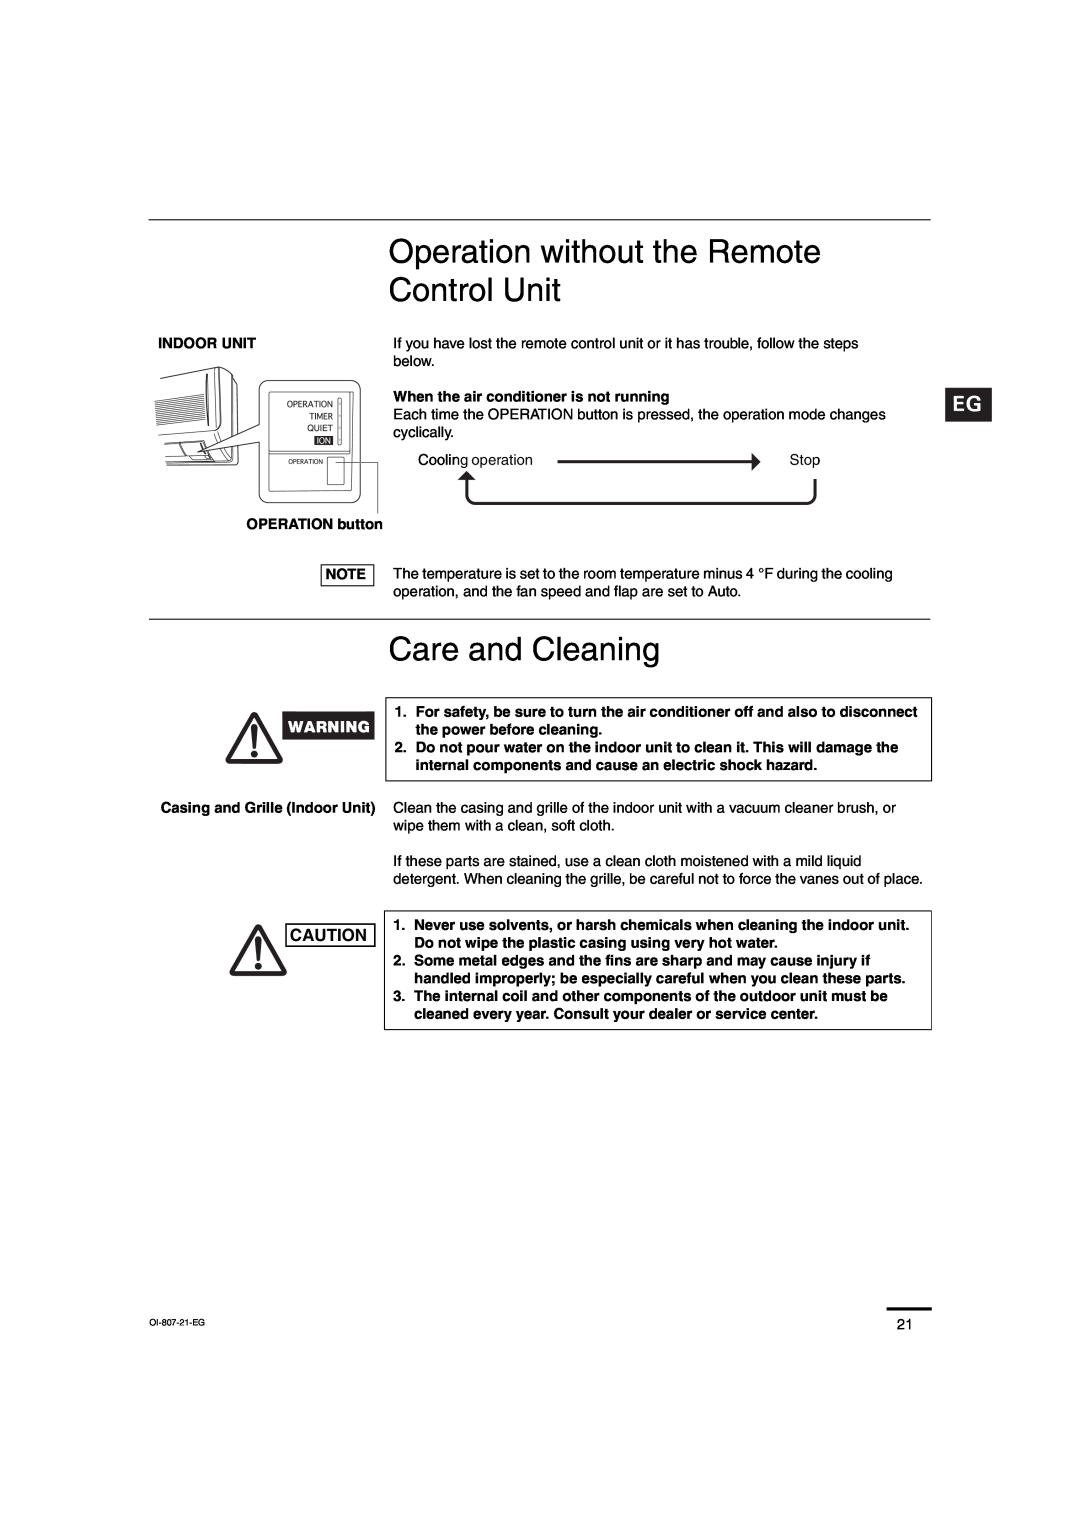 Sanyo KMS1872, KMS2472 service manual Operation without the Remote, Control Unit, Care and Cleaning 